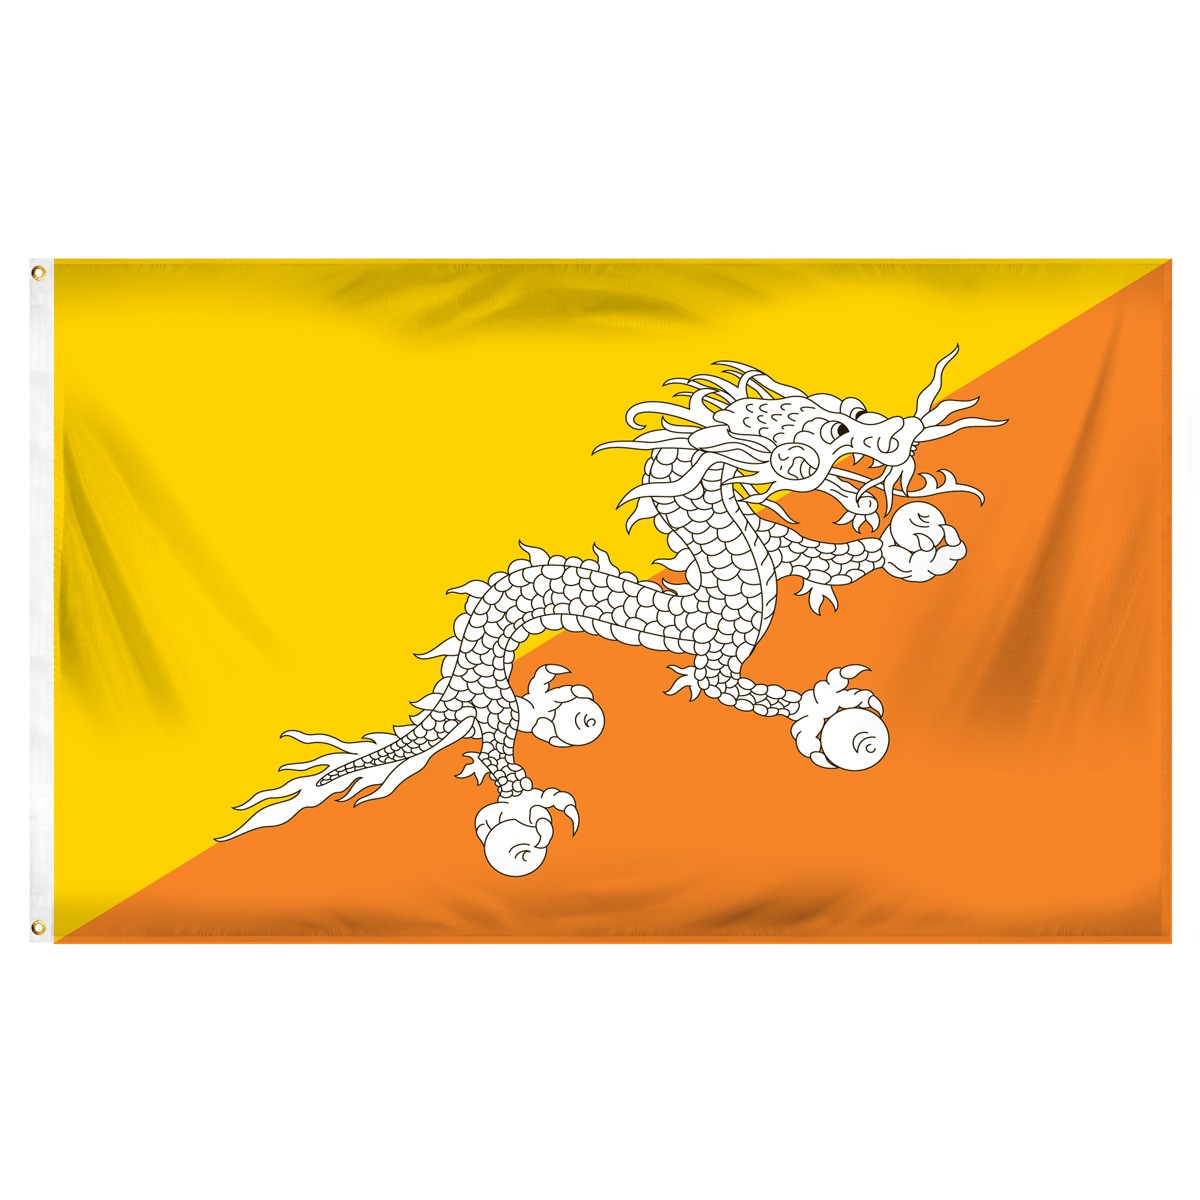 Bhutan Submit Flags and Flags